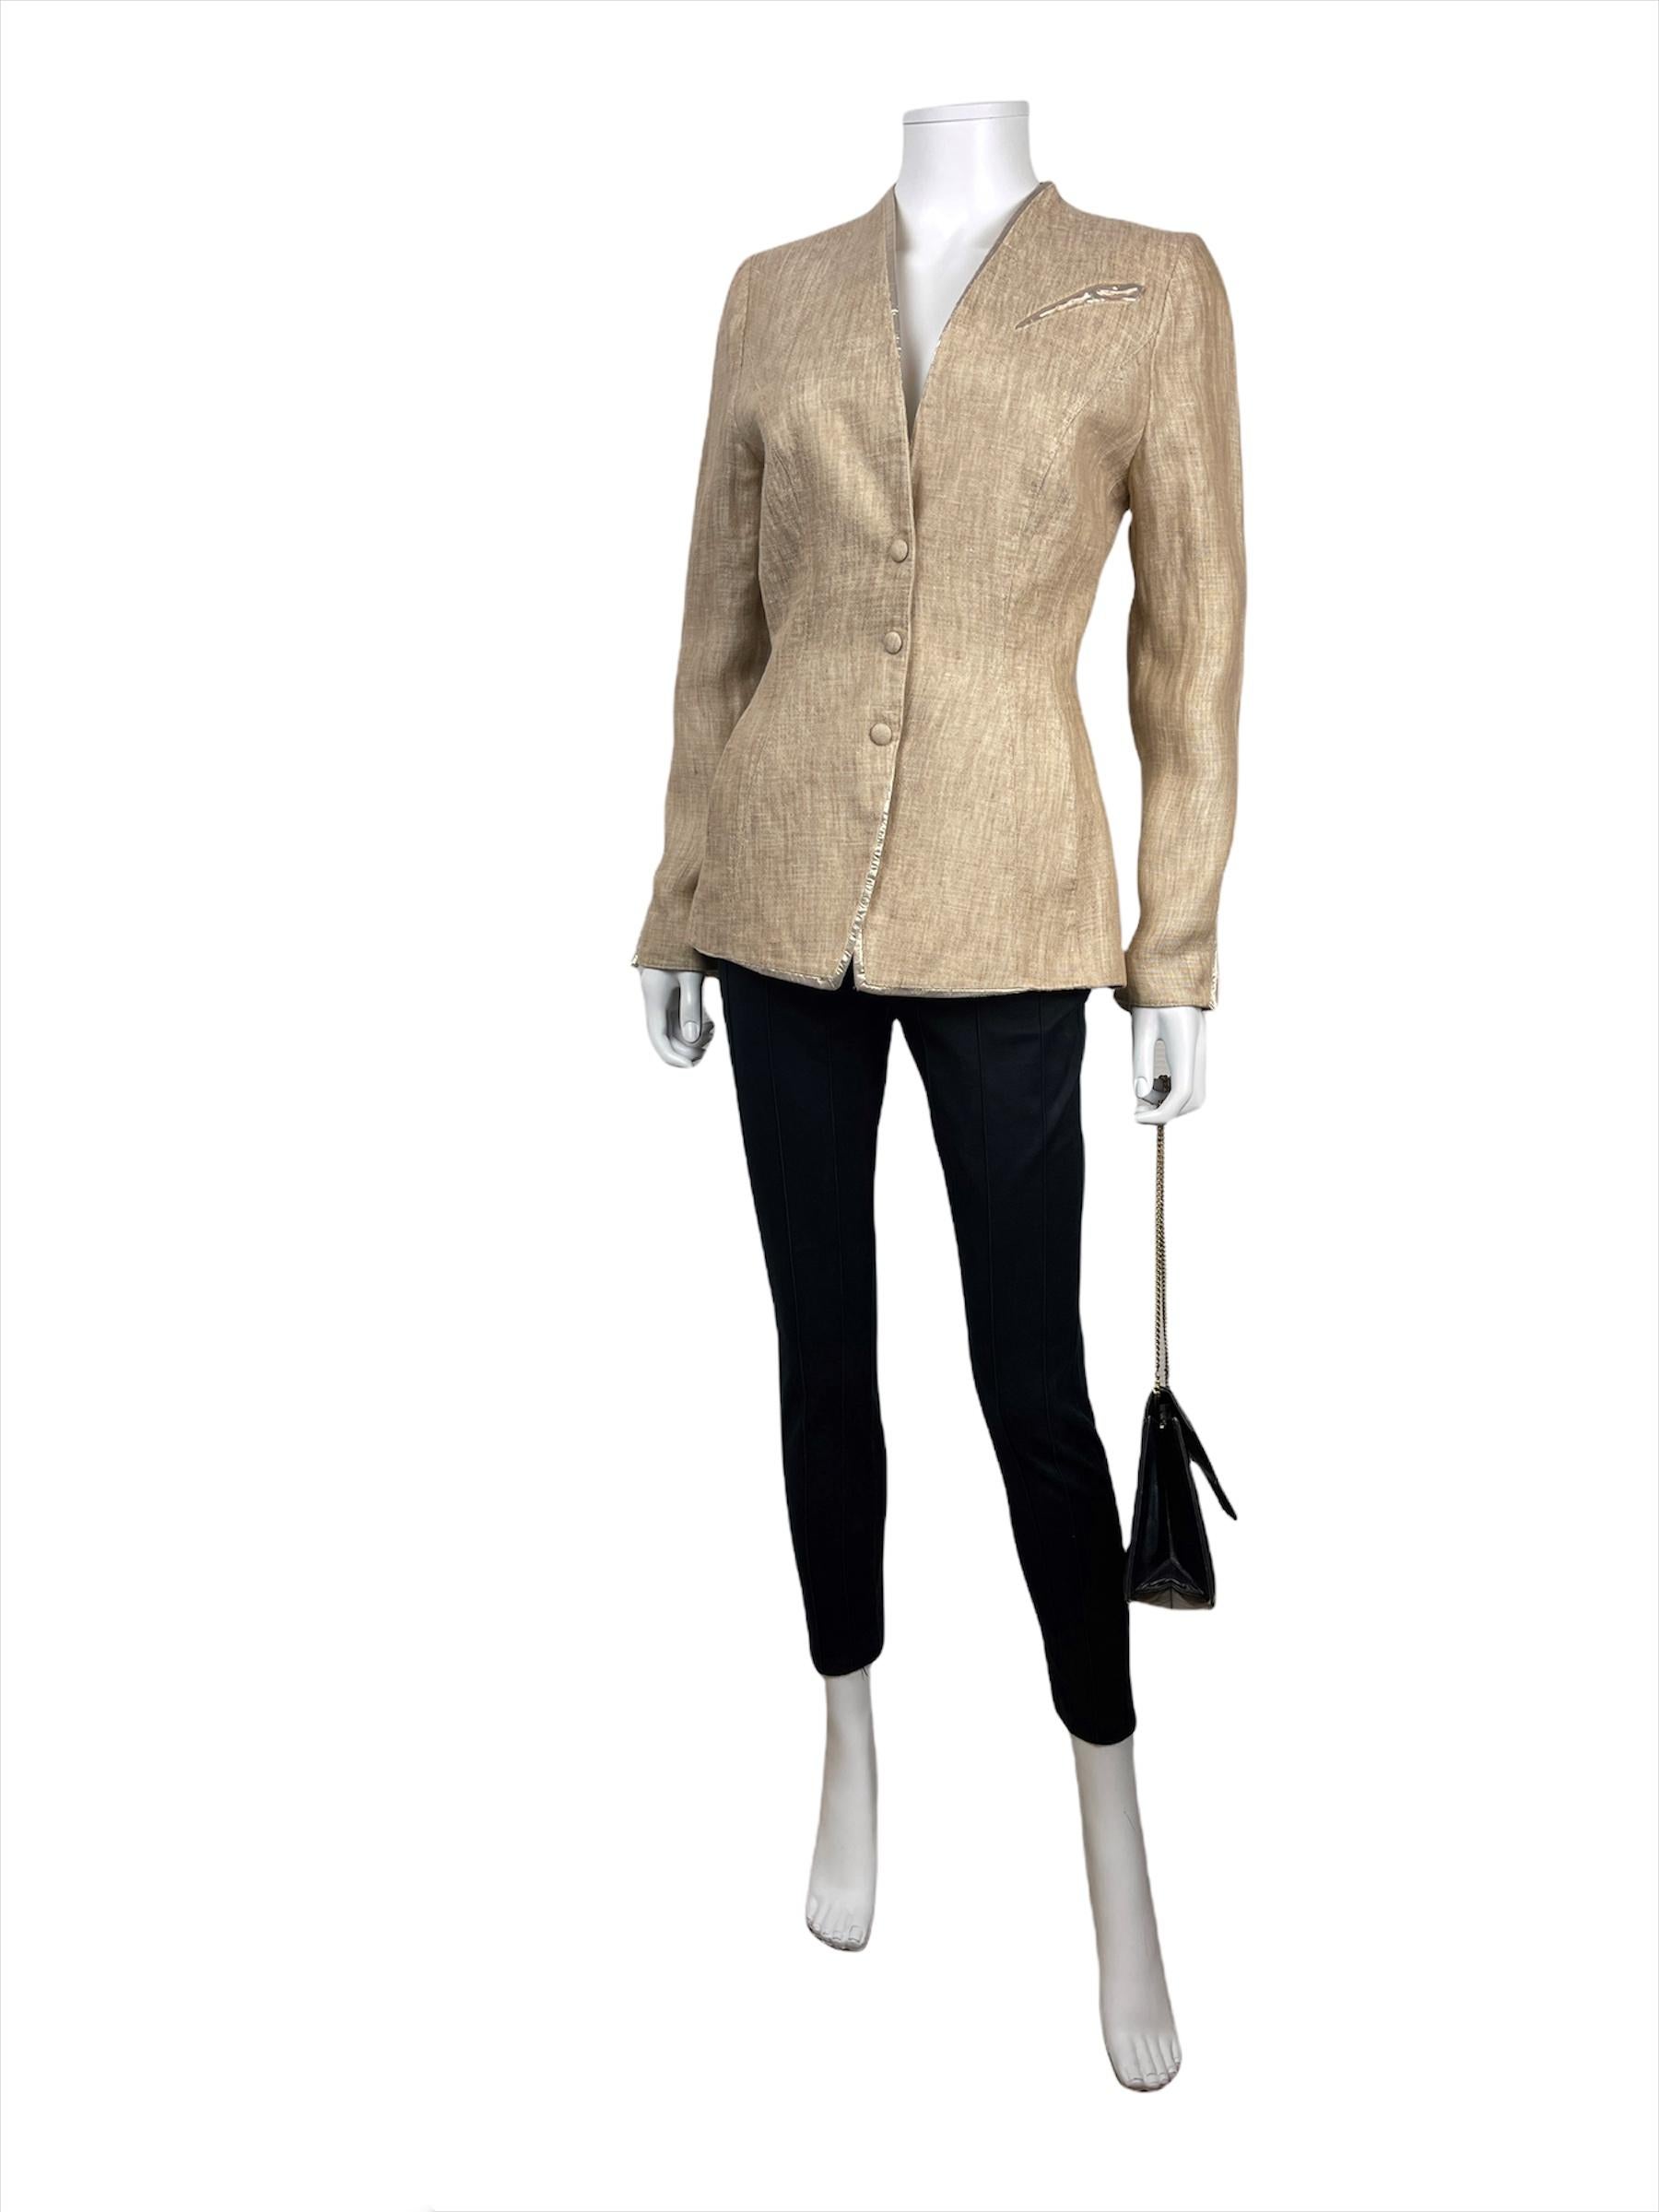 THIERRY MUGLER, Made in france.
Beige linen fitted jacket with golden metallic details and 3 snap buttons. 

Size tag is 40 but please see measurements bellow, taken flat and unstretched : 
Shoulder to hem : 37cm
waist : 37cm
length : 68cm
Sleeves